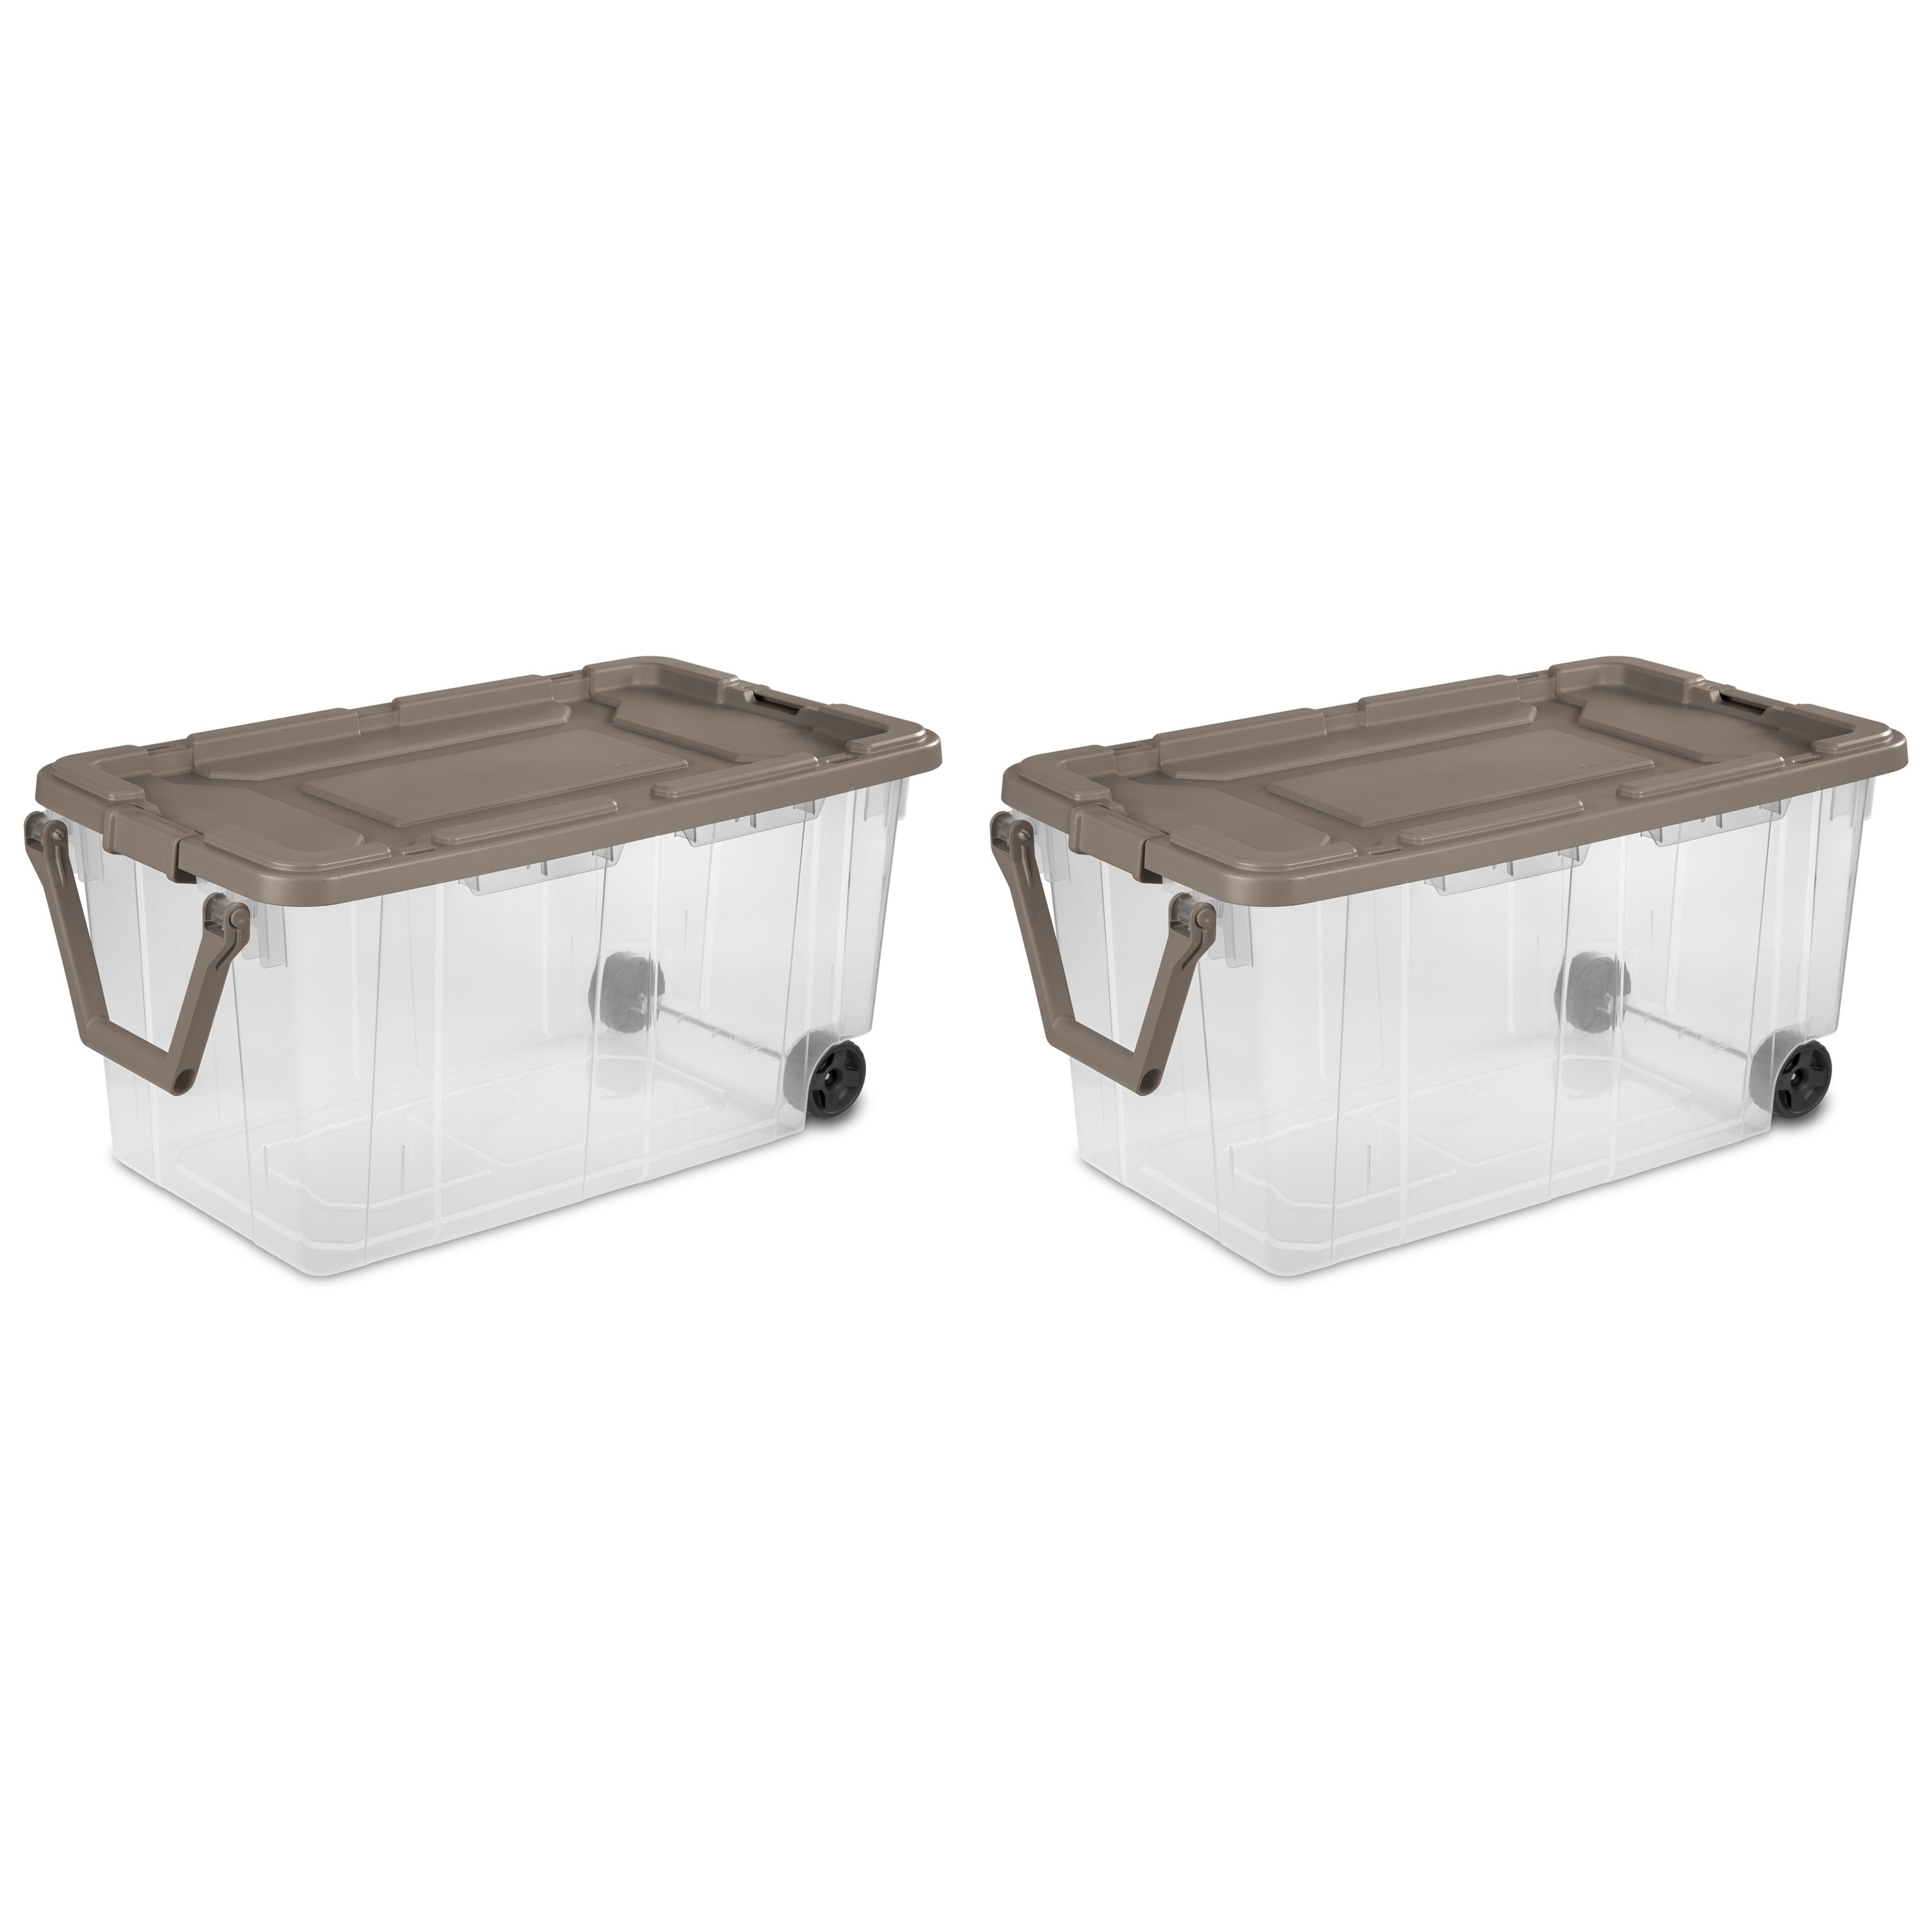 Details about   HOT DEAL Storage Container Stacker Box Taupe Splash 6 Pack Totes 30 Qt./28 L